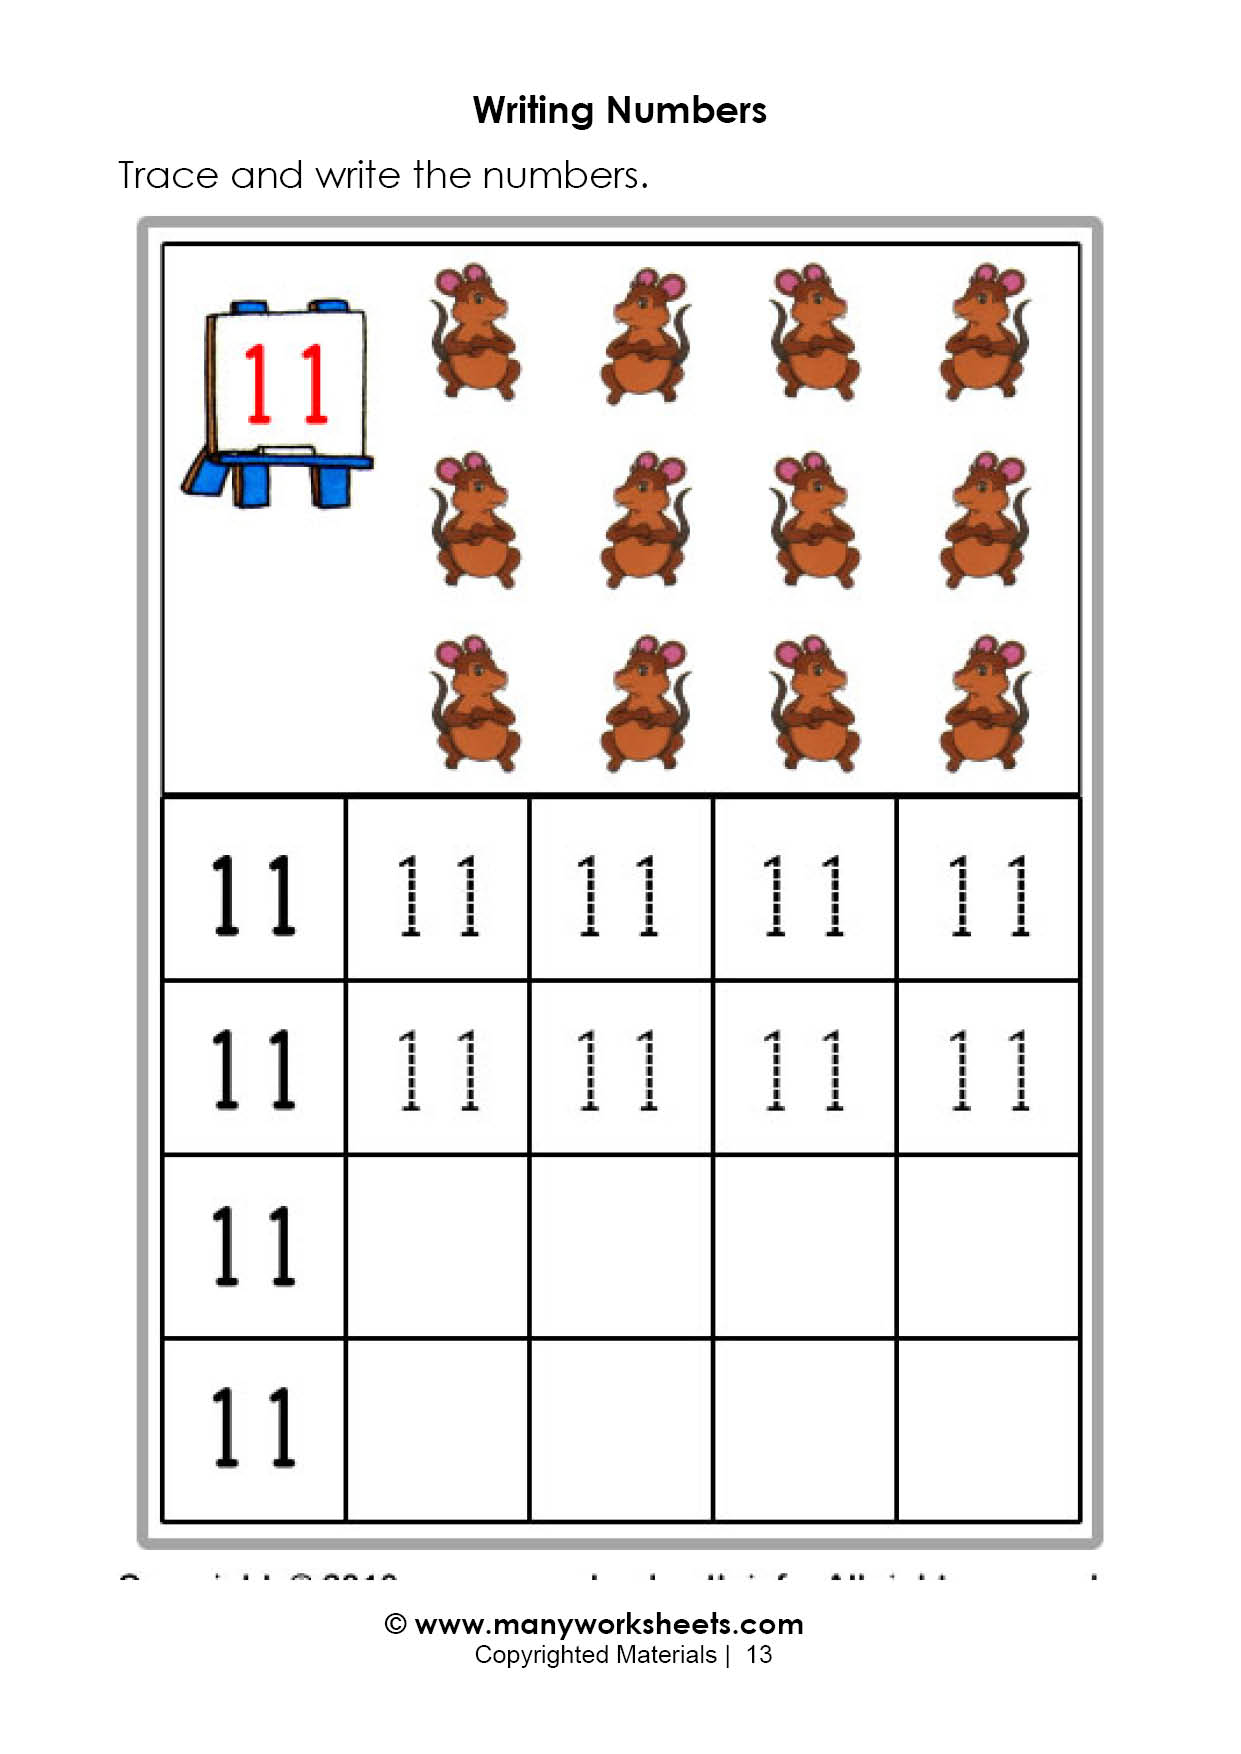 tracing-numbers-1-20-worksheets-number-tracing-number-writing-images